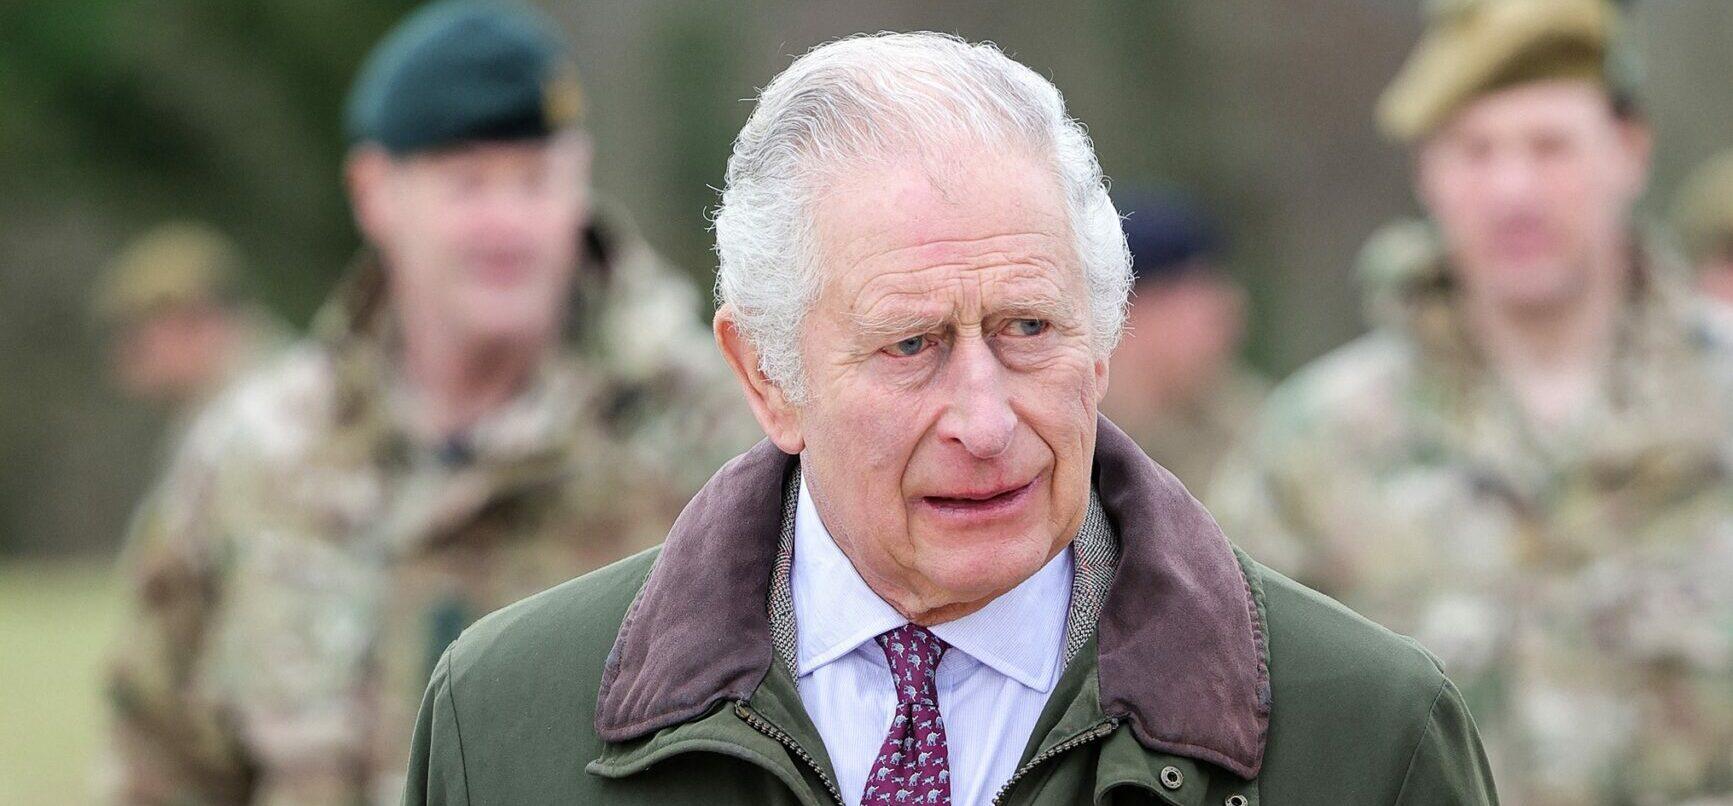 The Real Reason King Charles III Kicked Prince Harry Out Of Frogmore Cottage Revealed!